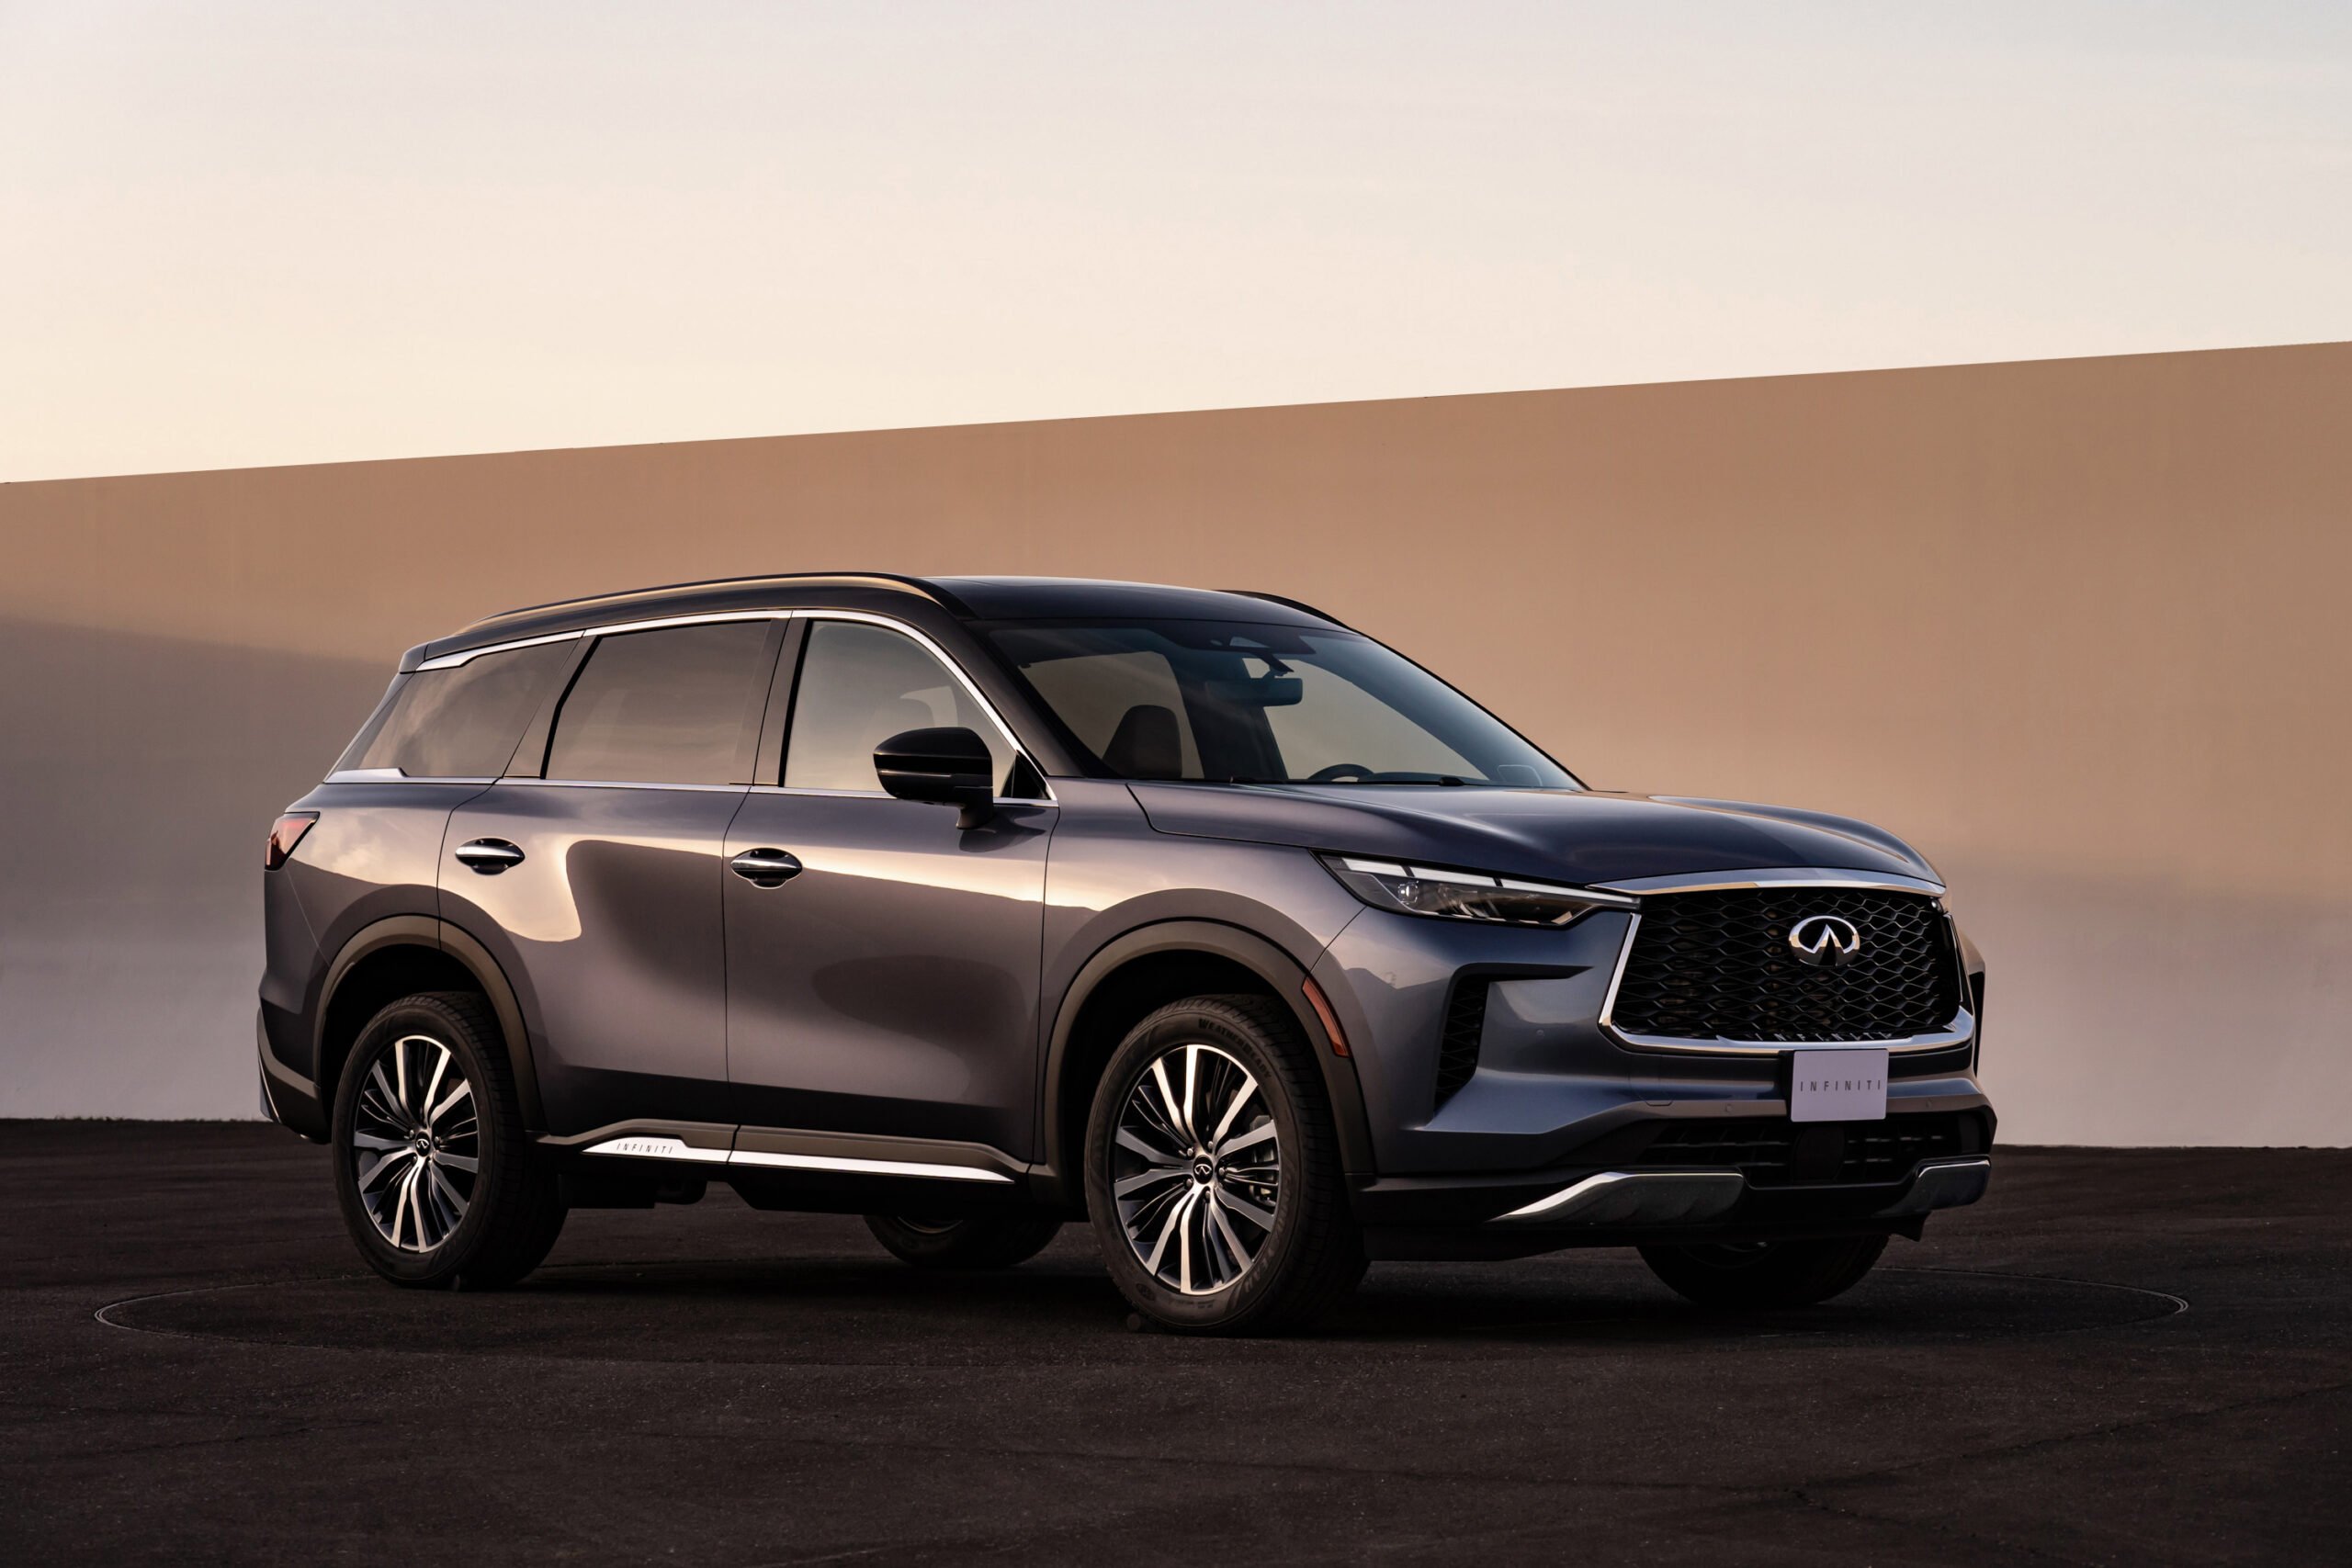 The All-New INFINITI QX60: Take on Life in Style